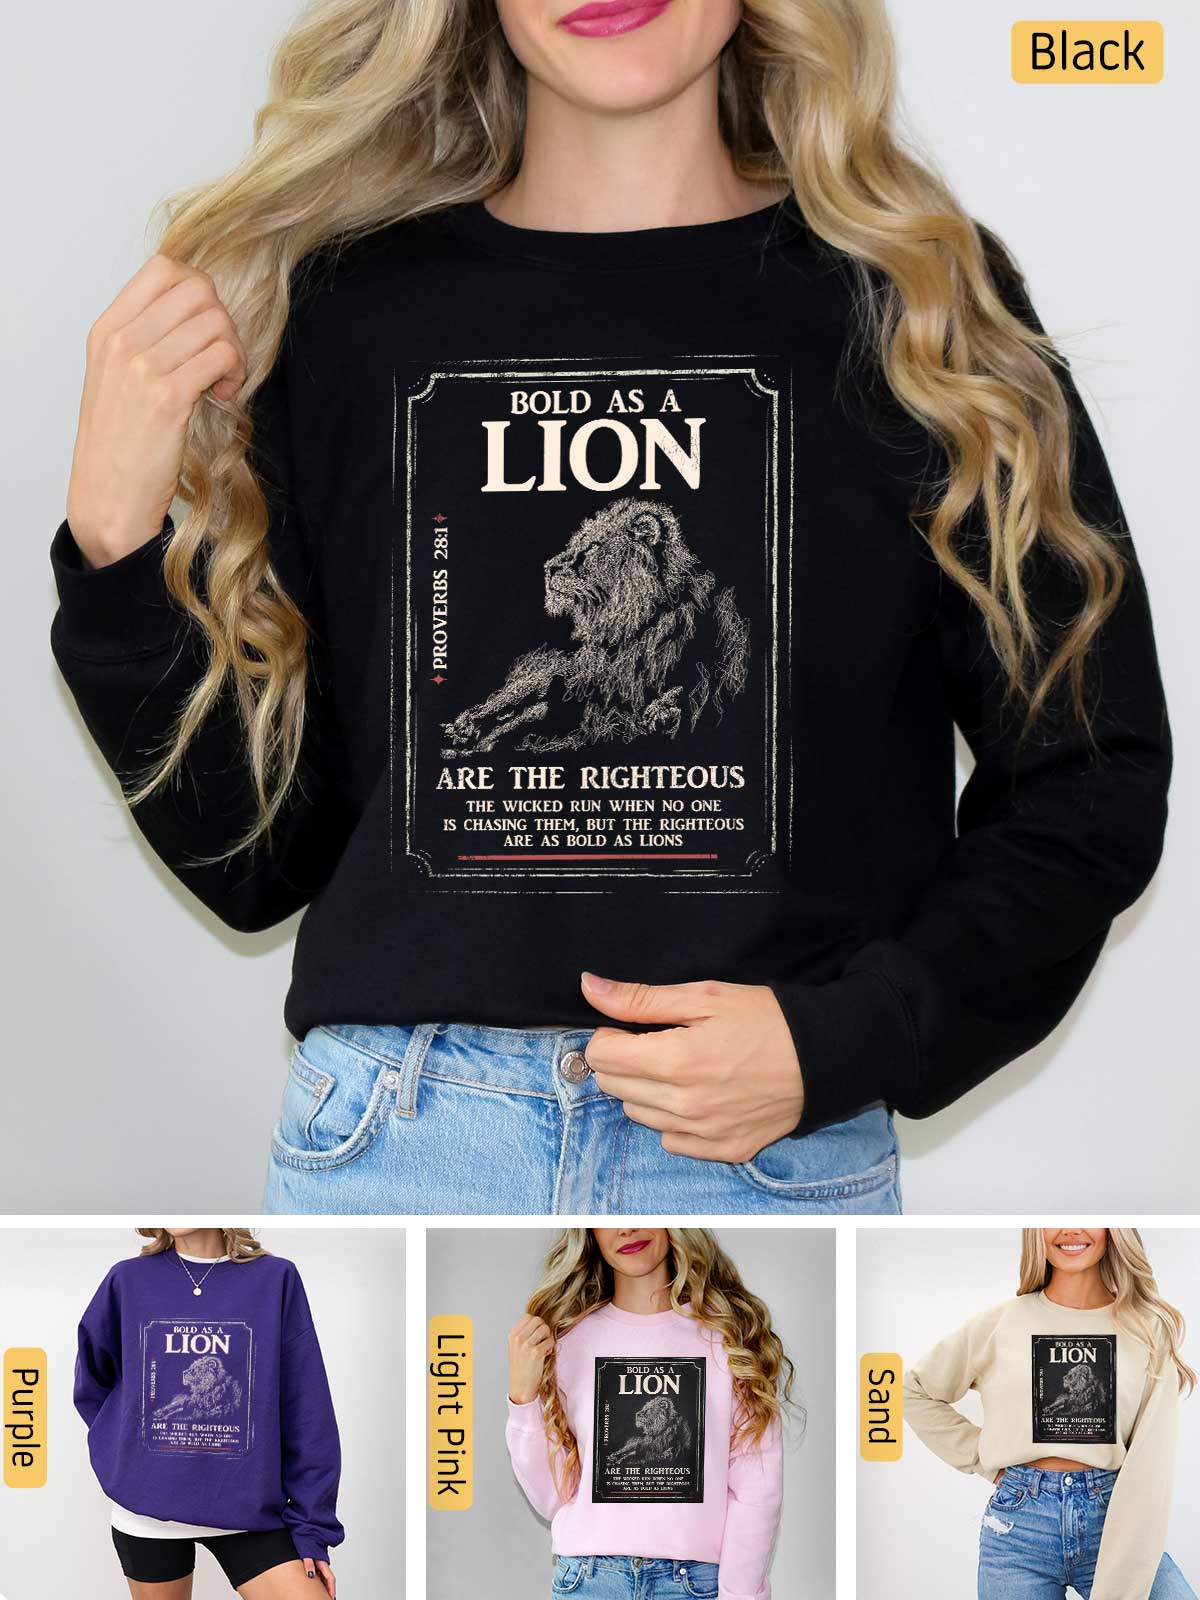 a woman wearing a black shirt with a lion on it